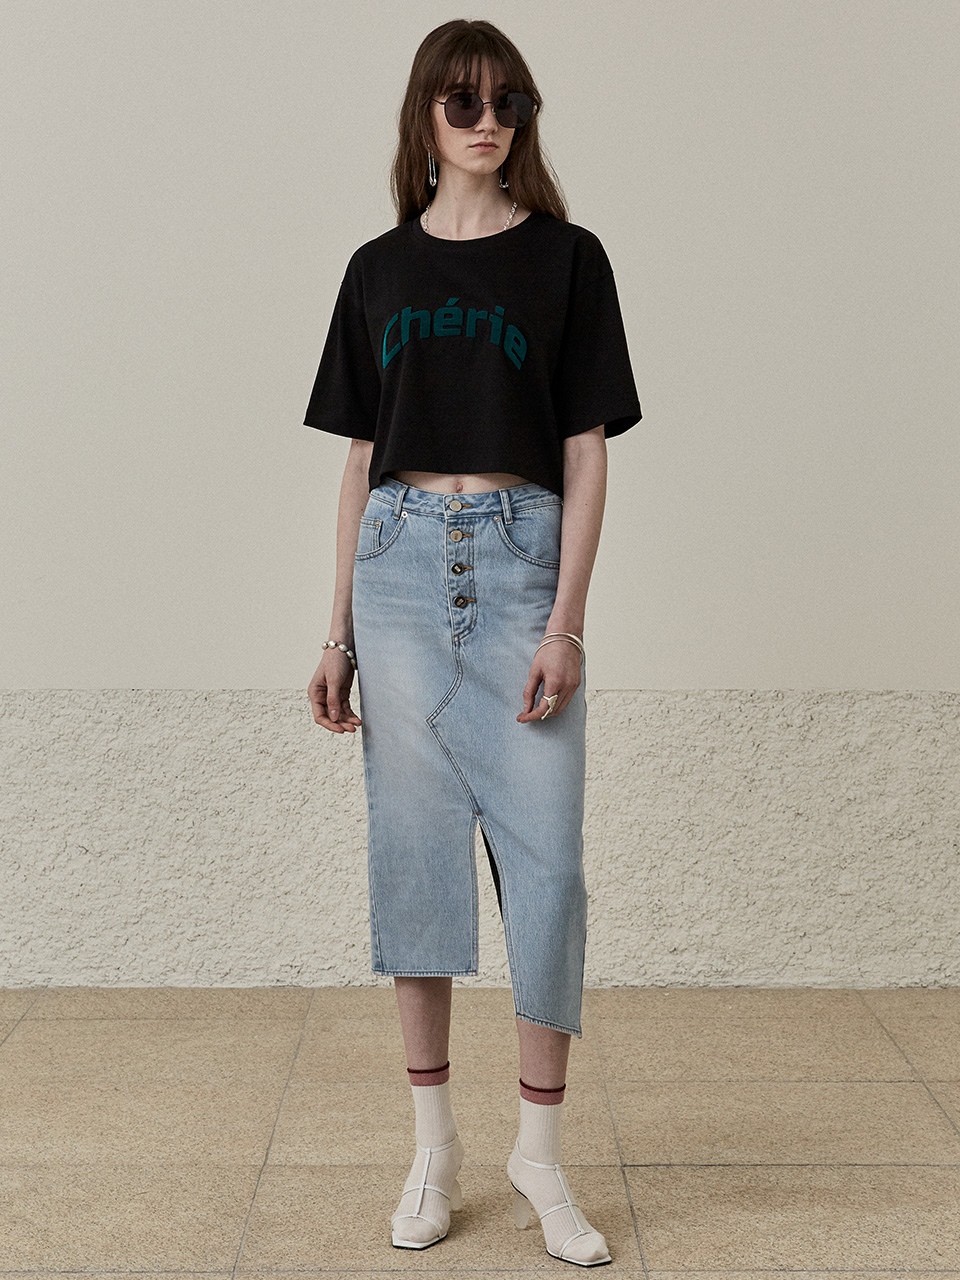 CHERIE Embroidered Cotton T-Shirt_Black